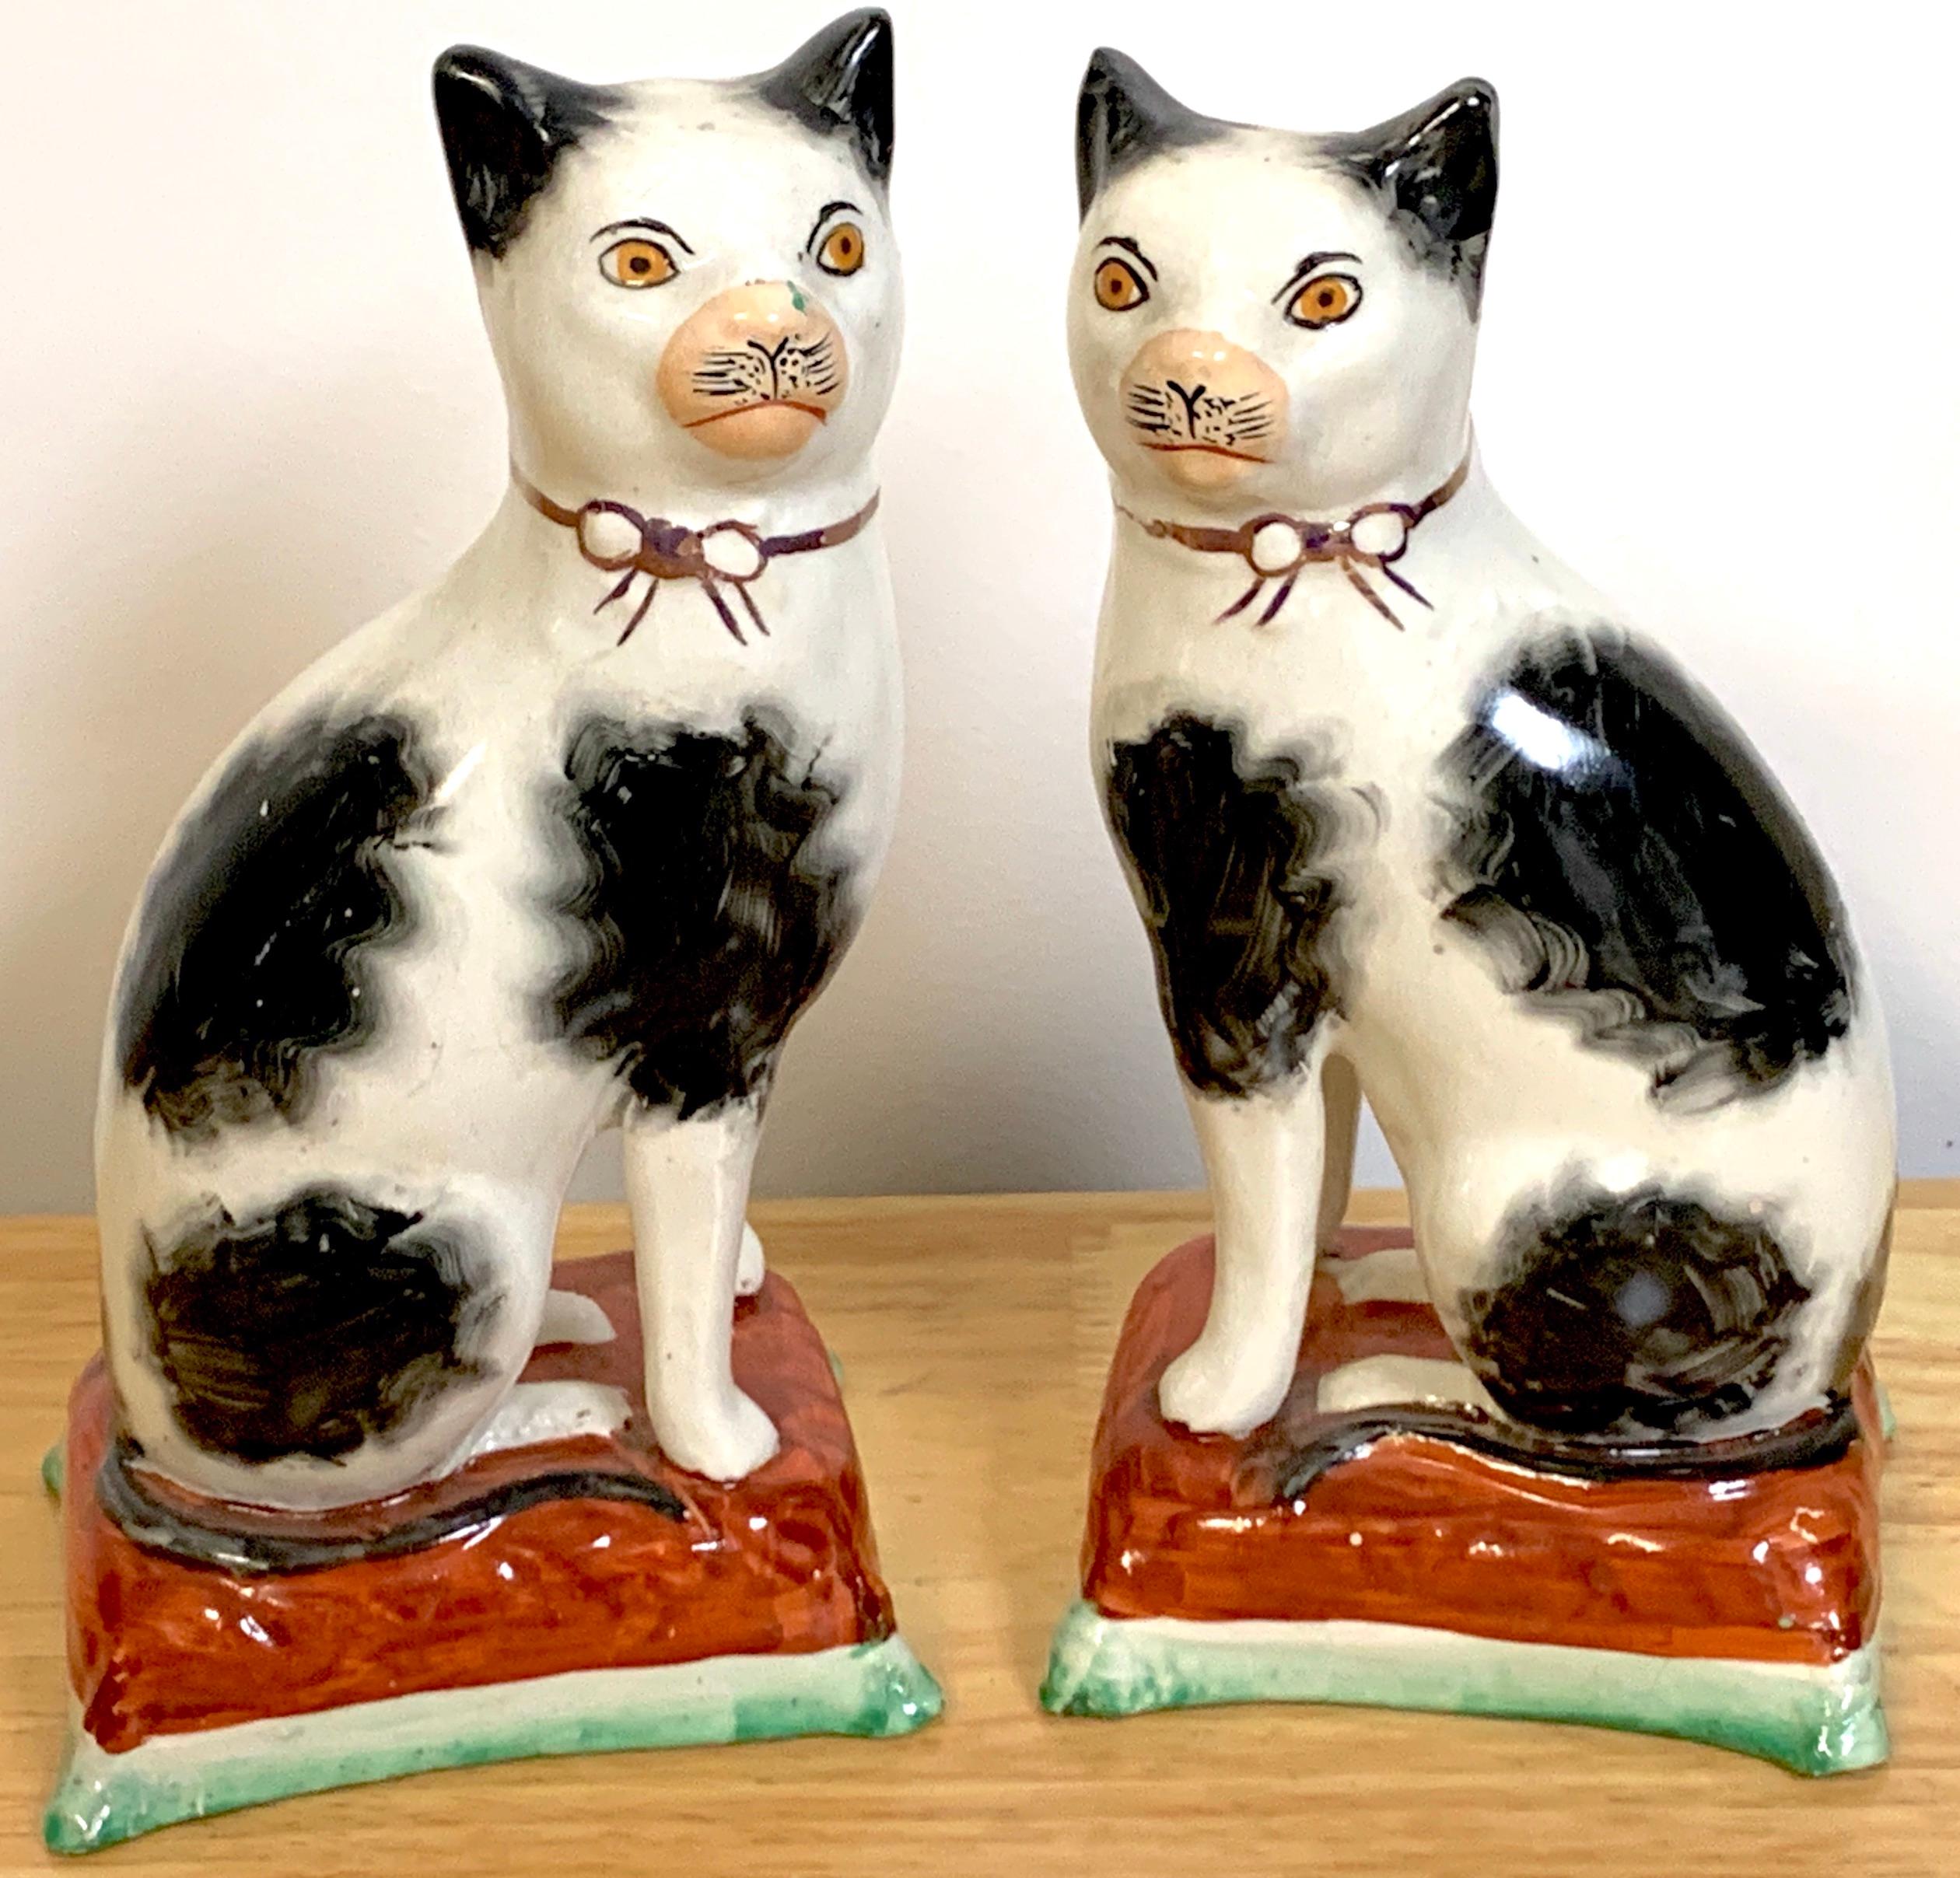 Pair of 19th century Staffordshire seated cats, each one an expressive black and white feline, sitting on a tasseled cushion. Unmarked, circa 1860
Each one measures 7.5-inches high x 4-inches wide x 3-inches deep.
  